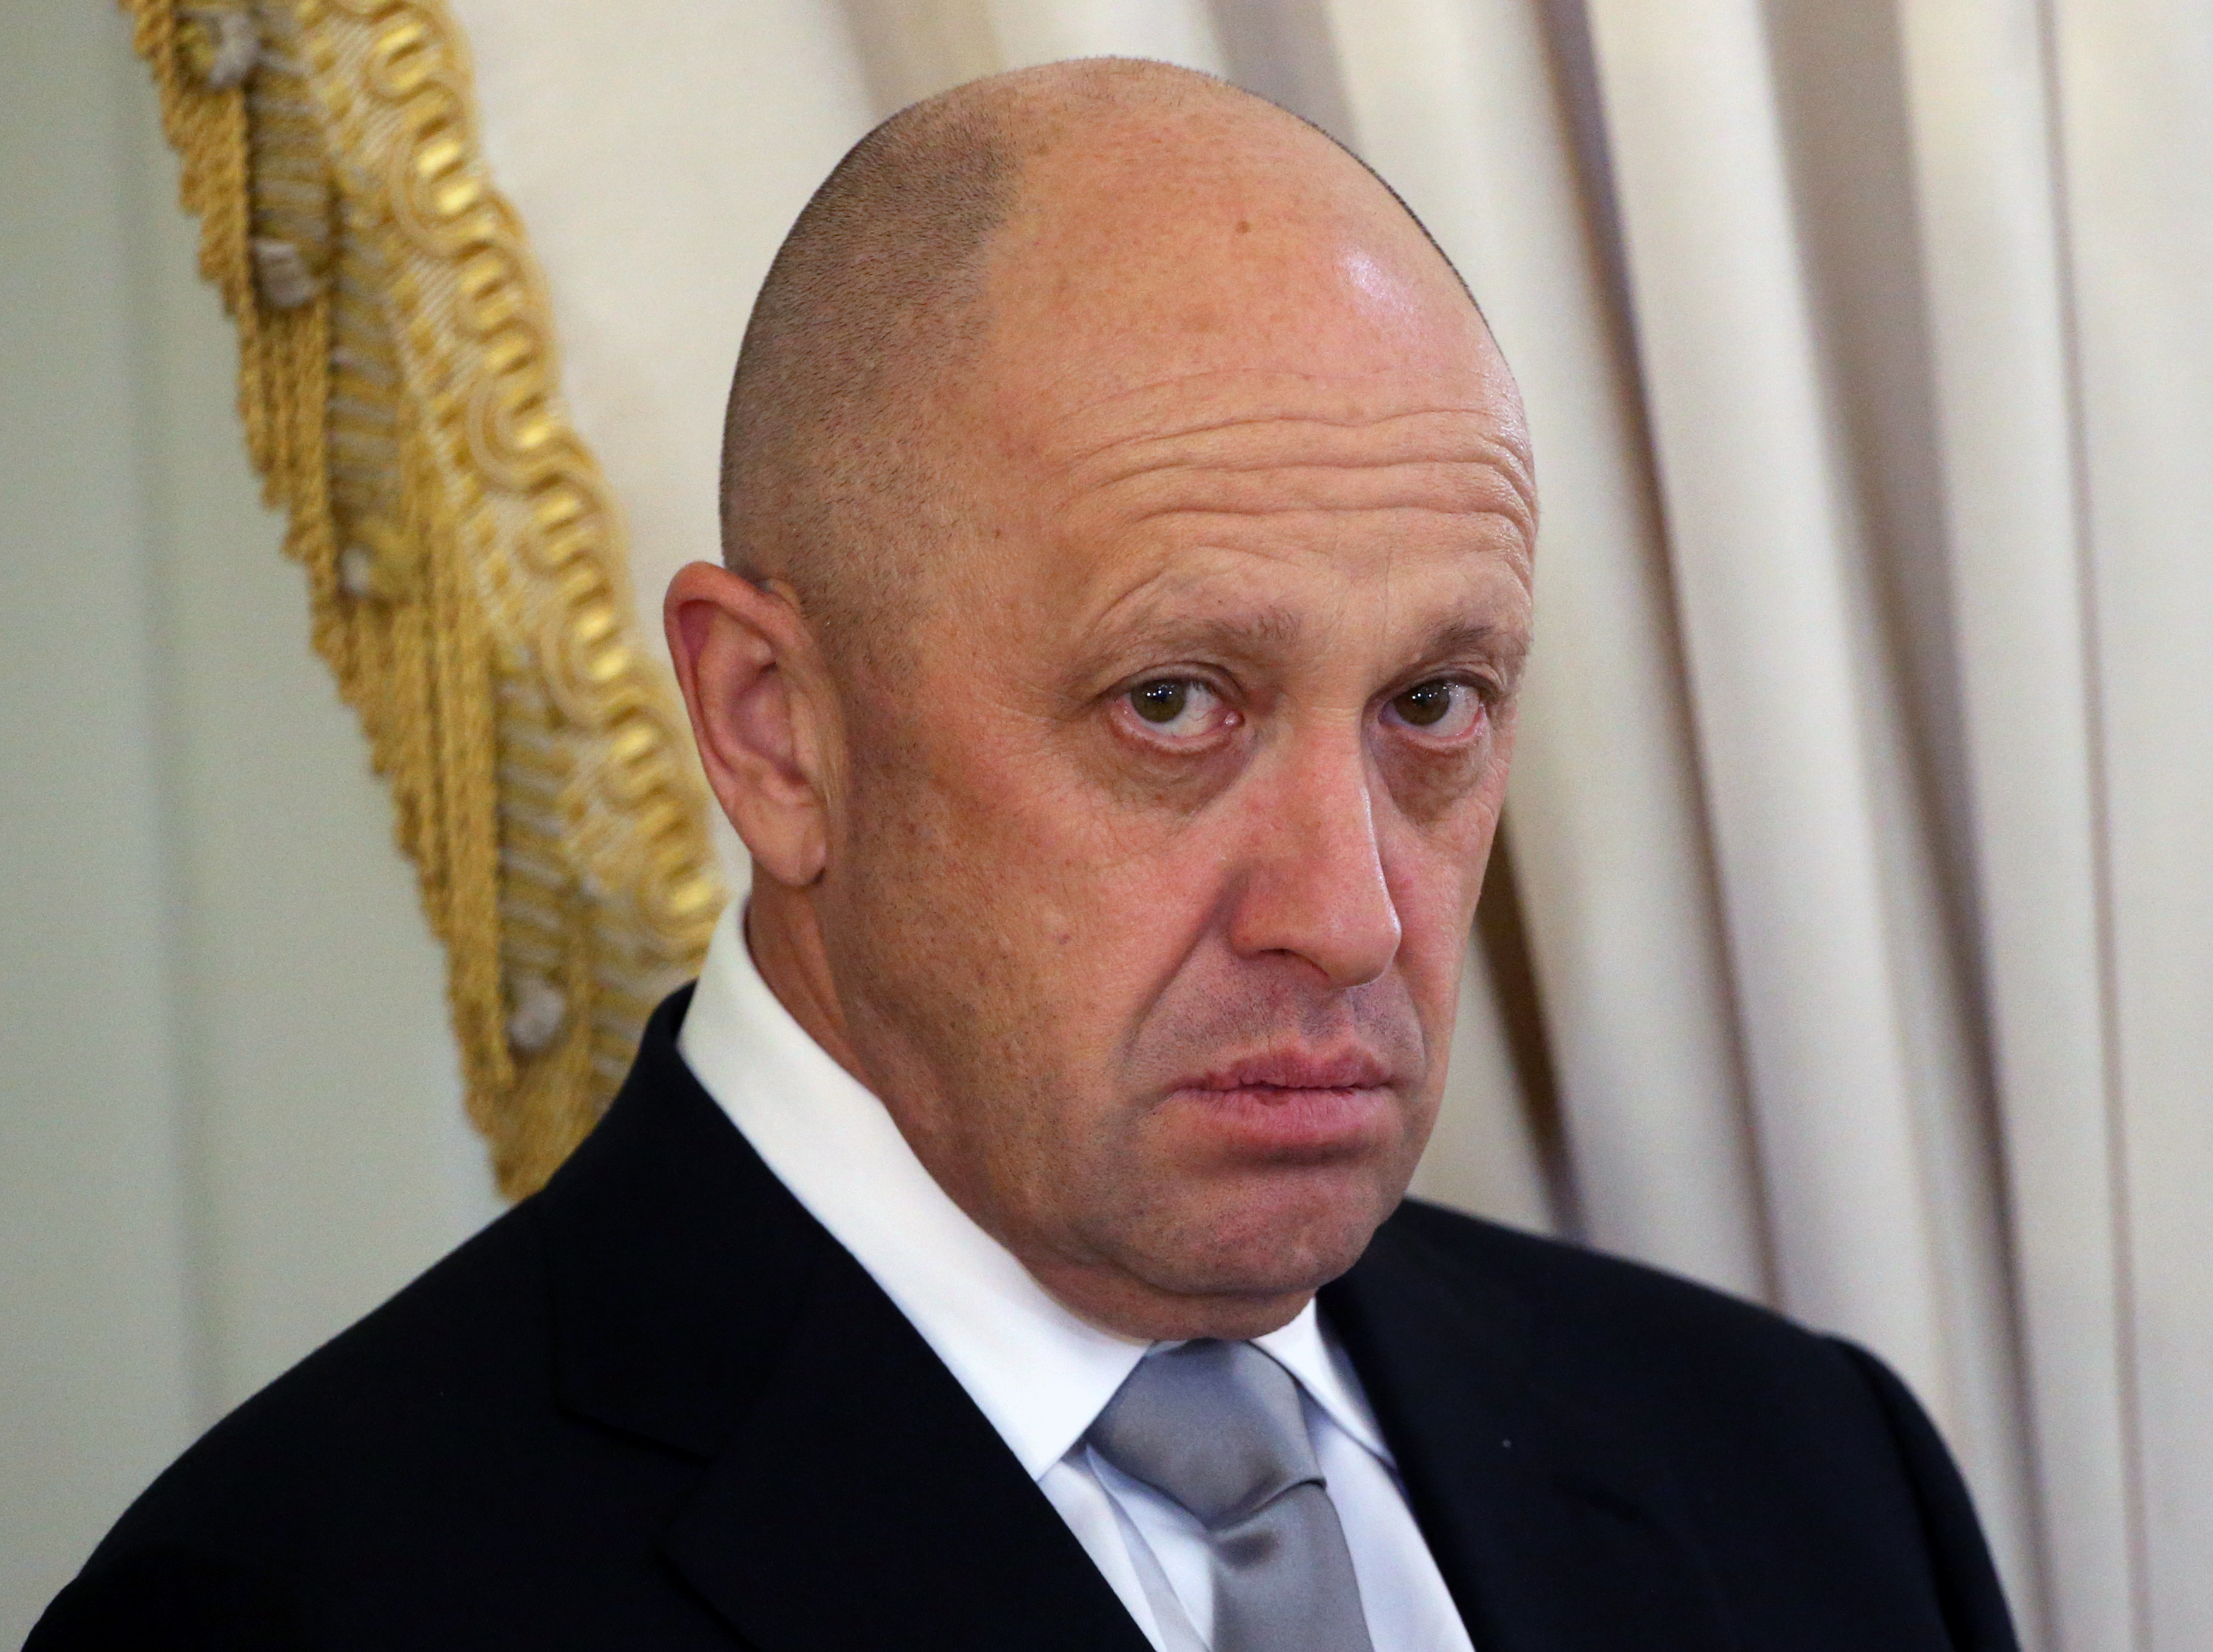  Russian billionaire and businessman Yevgeny Prigozhin attends a meeting with foreign investors at Konstantin Palace on June 16, 2016, in Saint Petersburg, Russia.